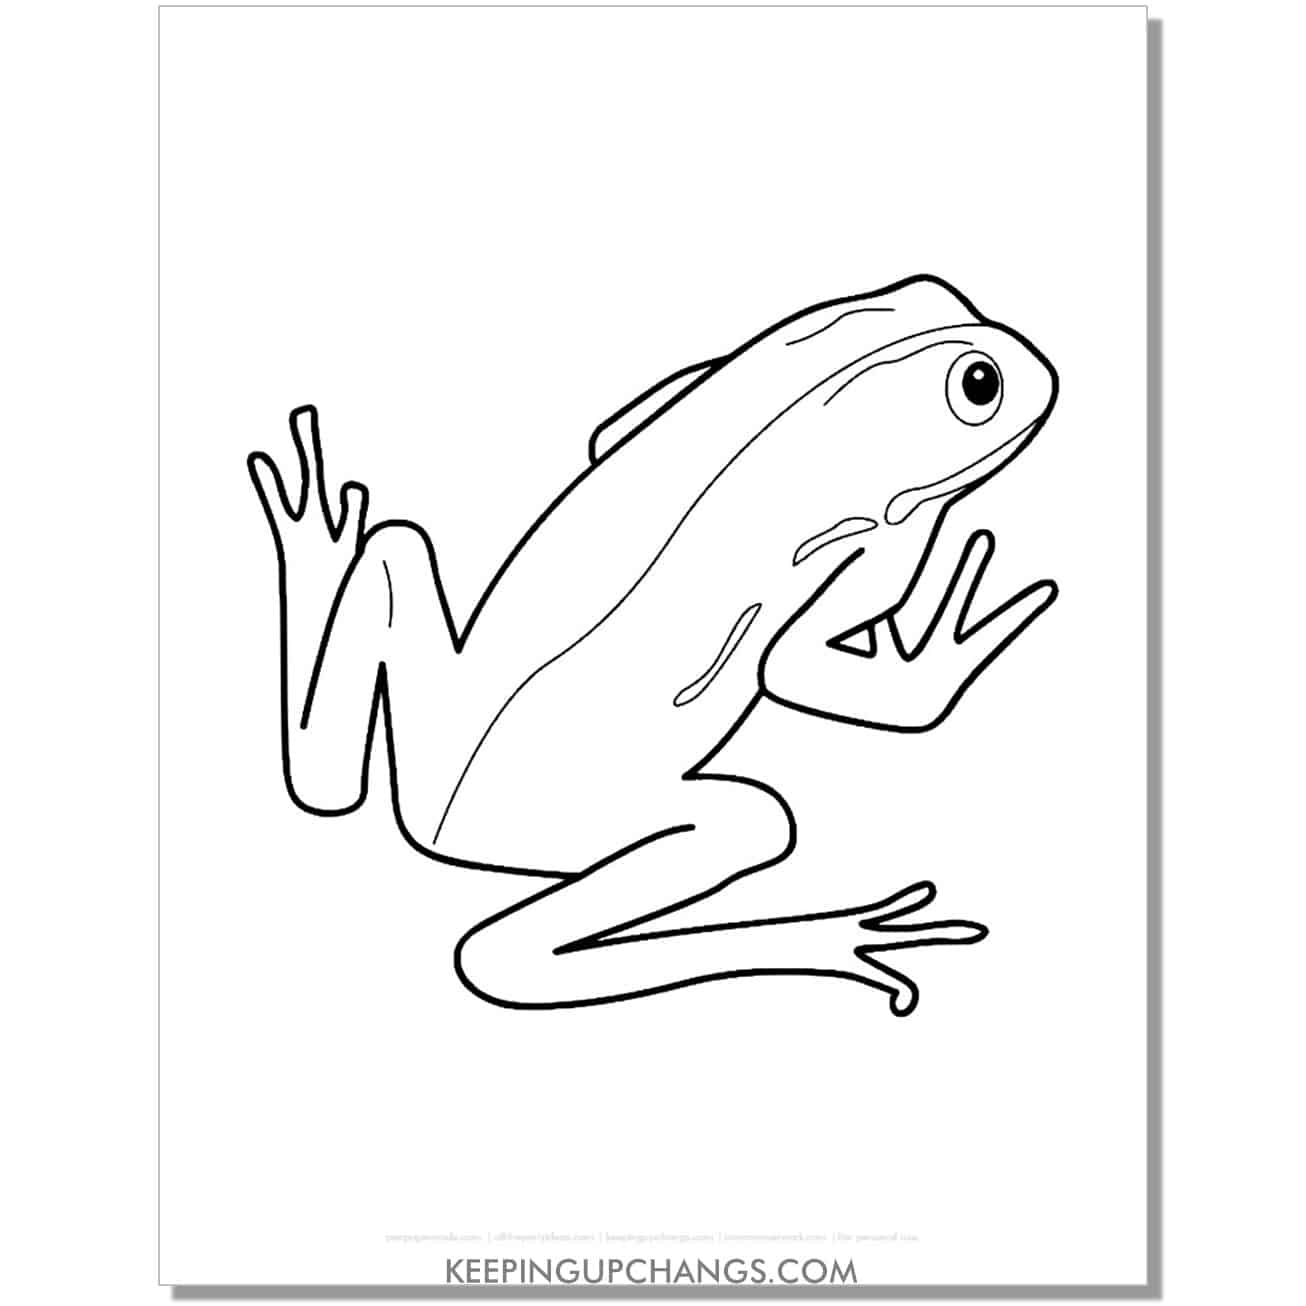 free simple outline of tree frog coloring page, sheet.